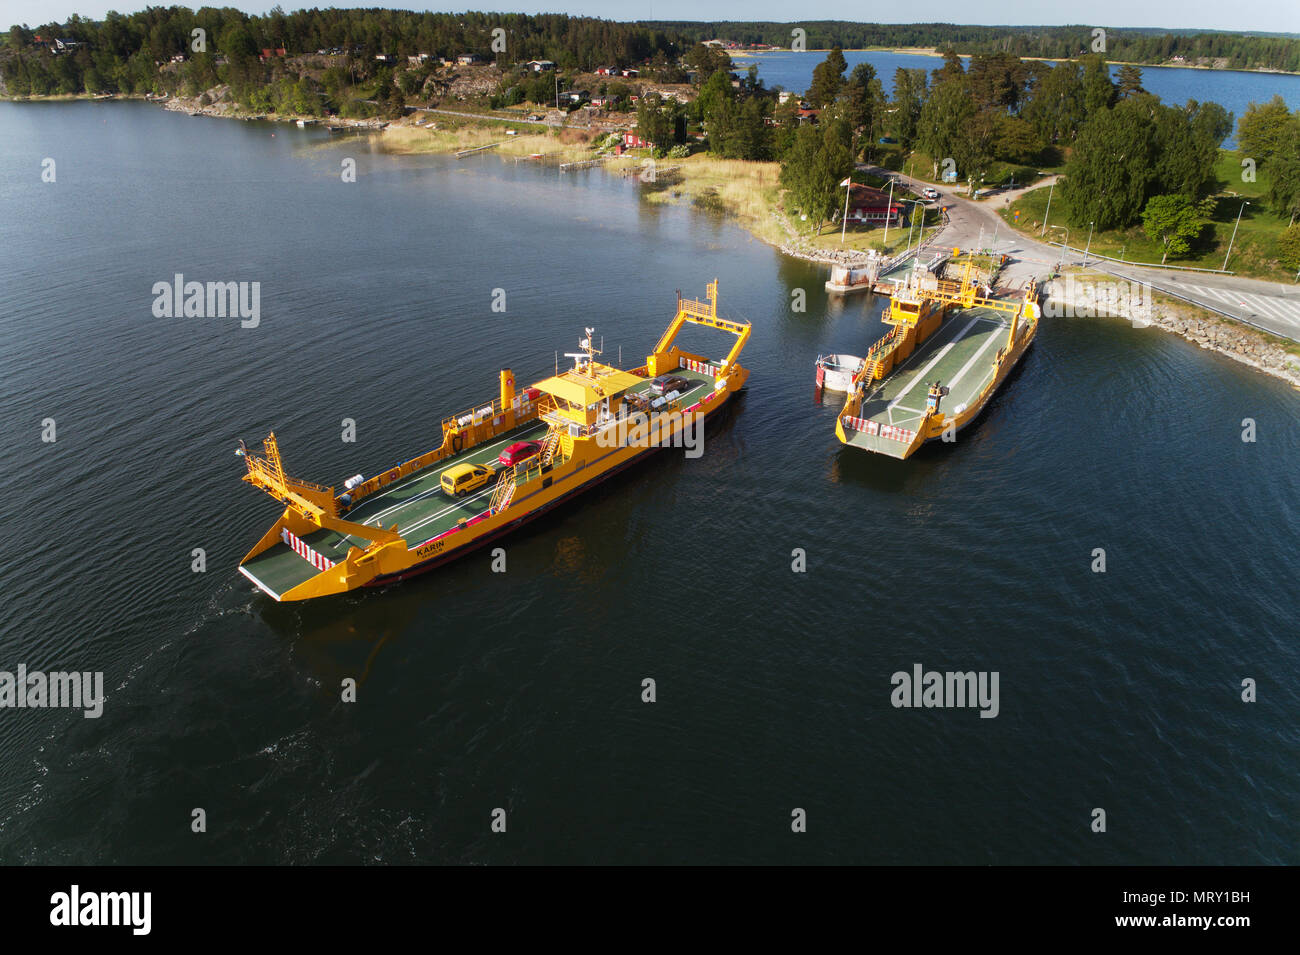 Horningsnas, Sweden - May 22, 2018: Aerial view of a yellow road ferry operateded by the Swedish Transport Administration (Trafikverket)  as part of t Stock Photo